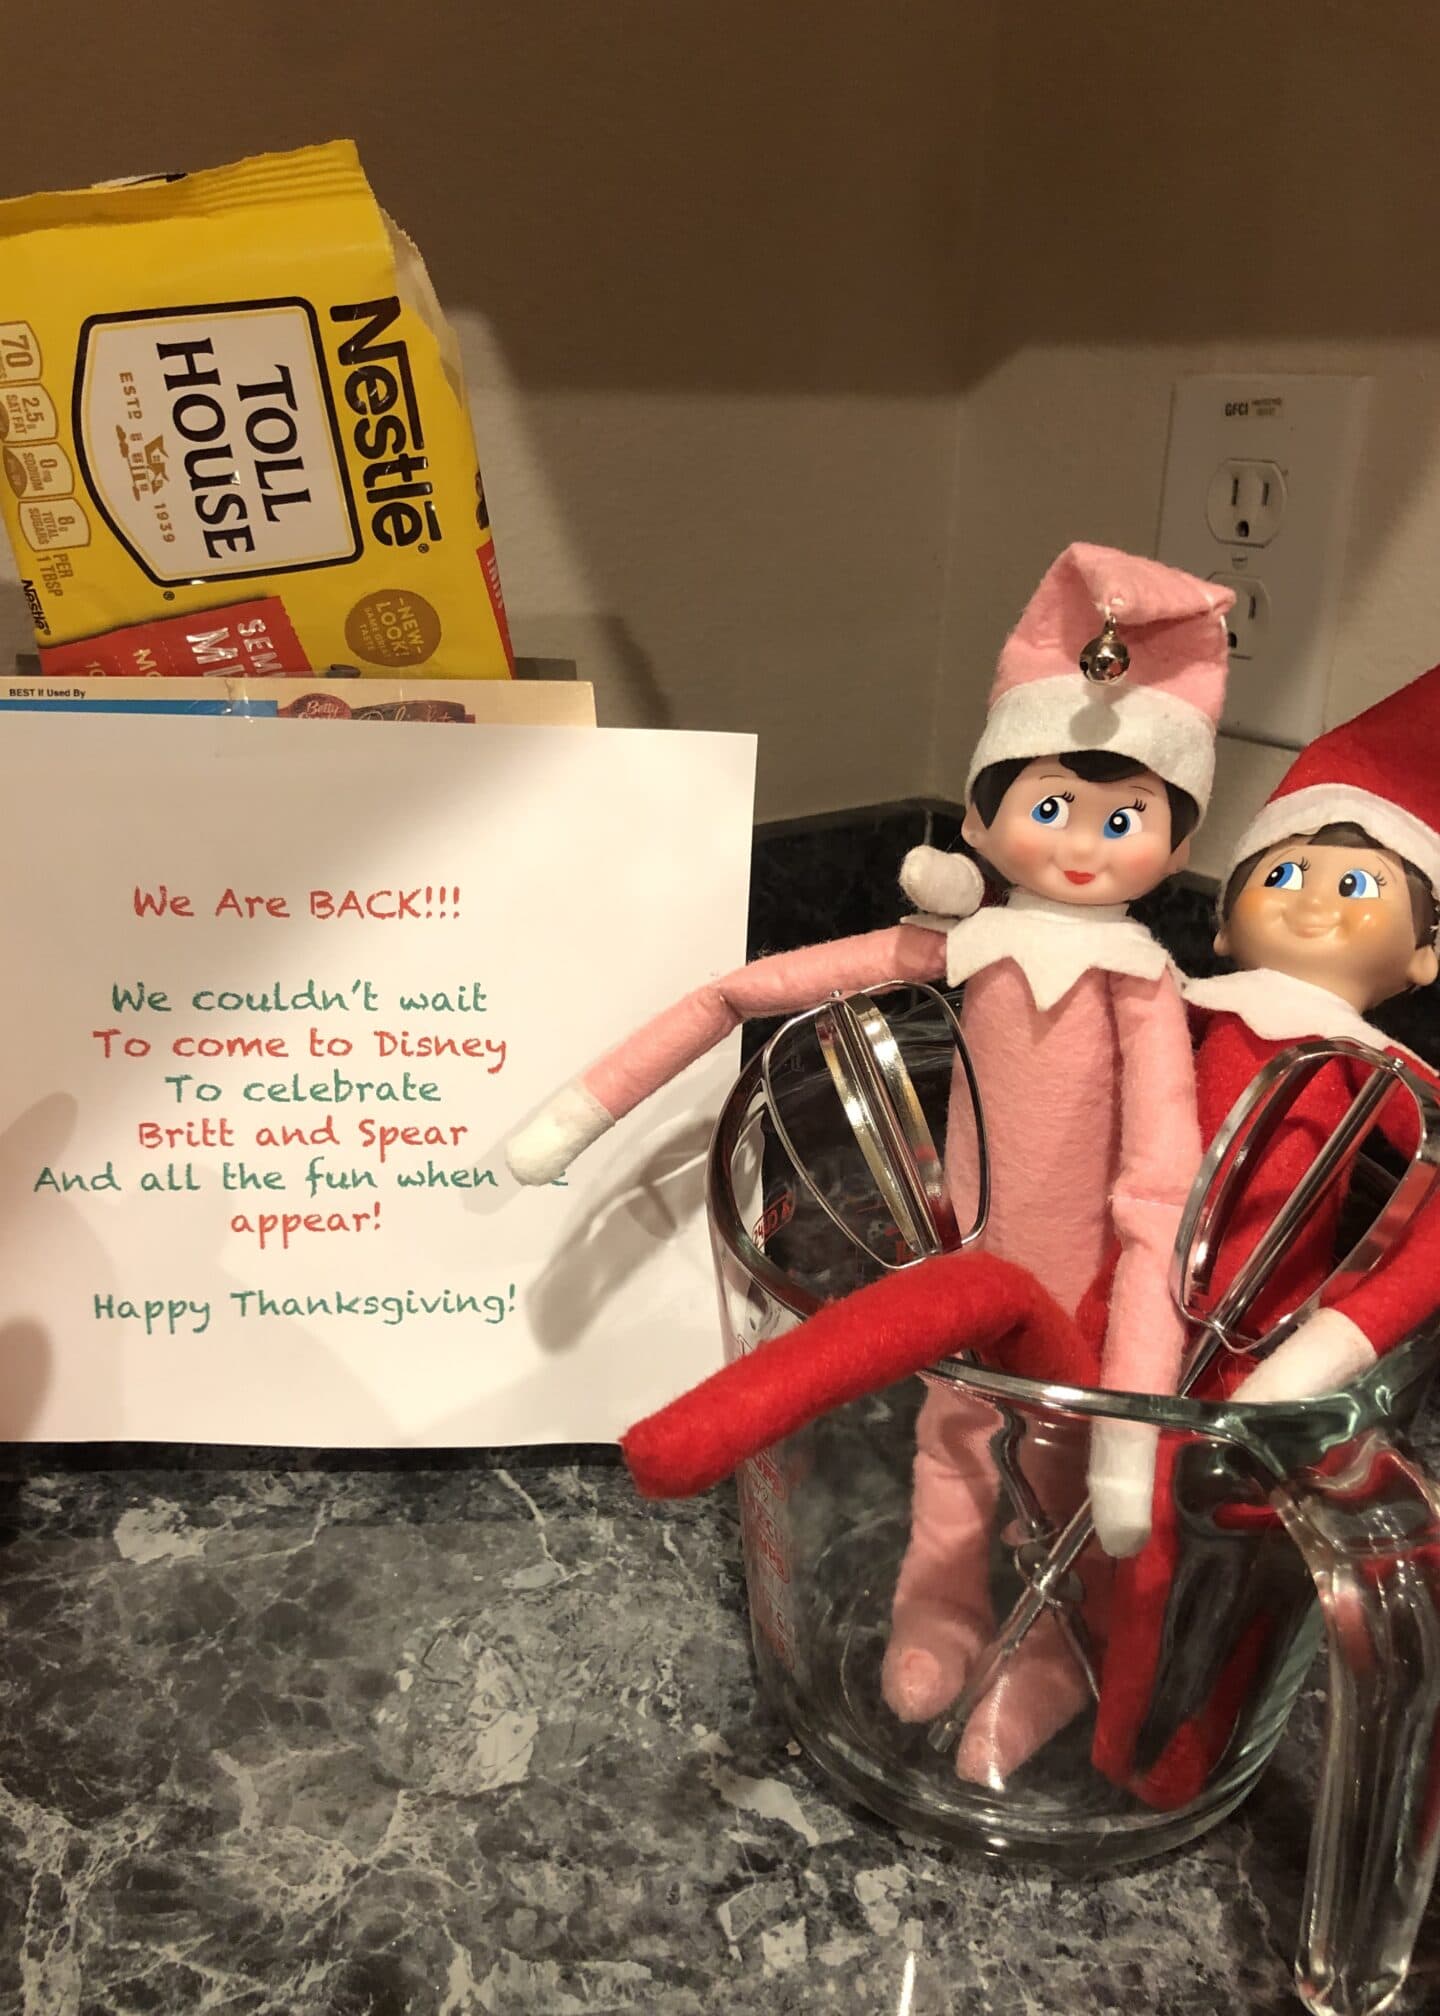 25 Super Easy Elf on the Shelf Ideas - The Journey of Parenthood...